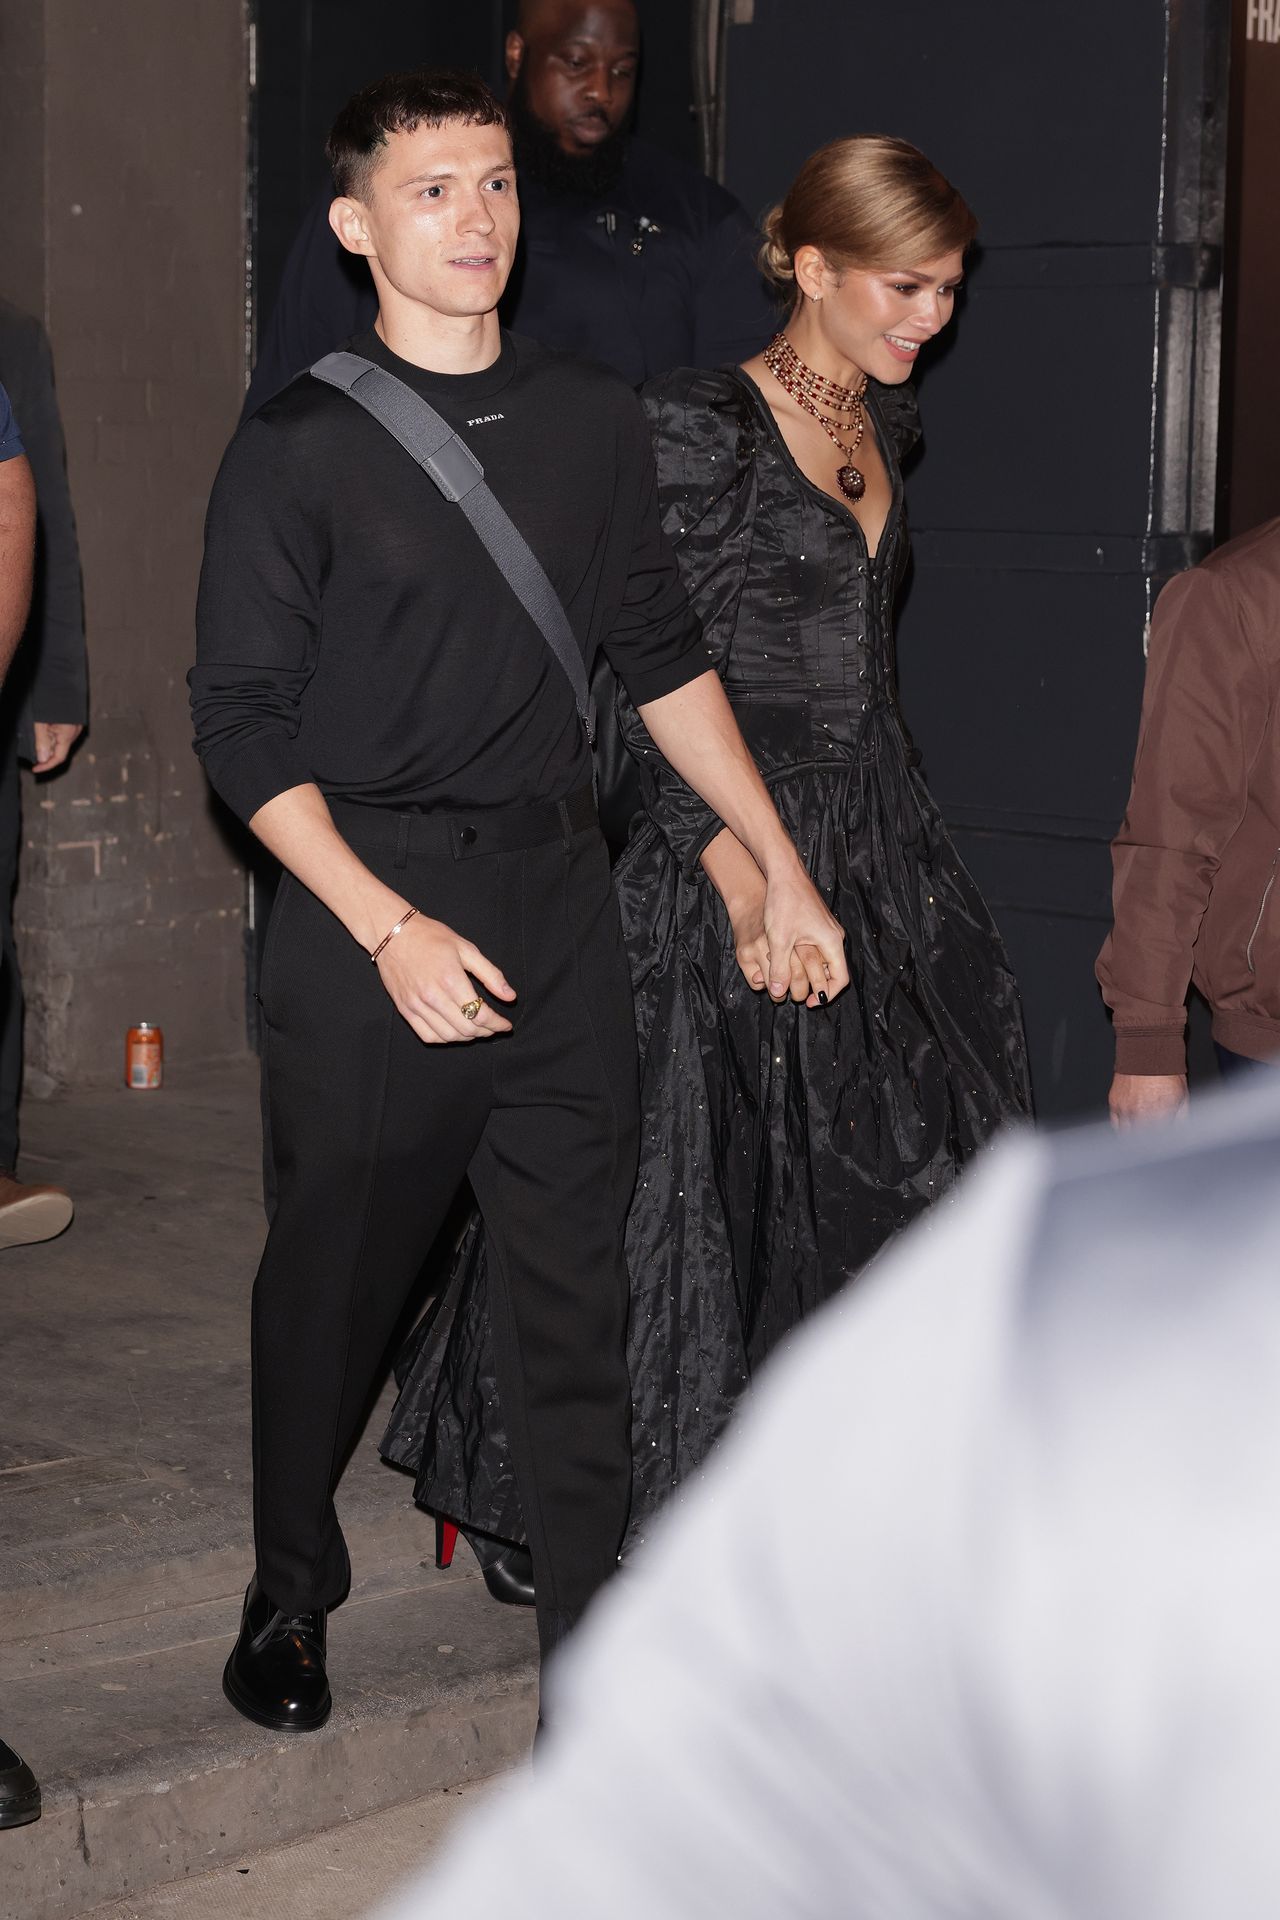 Zendaya and Tom Holland "caught" in London